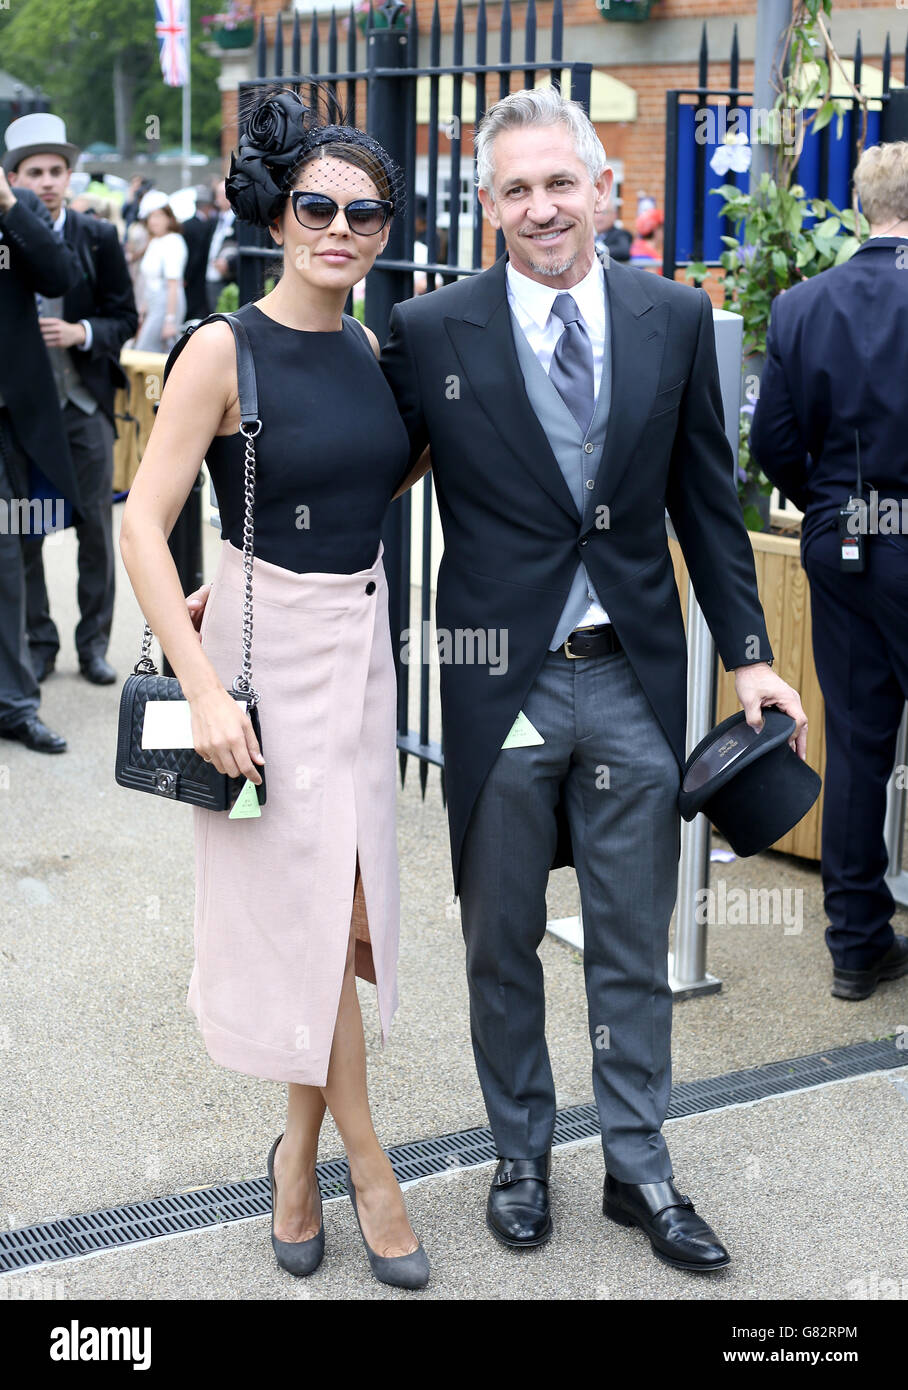 Gary and Danielle Lineker pose for a photograph during day one of the 2015 Royal Ascot Meeting at Ascot Racecourse, Berkshire. Stock Photo